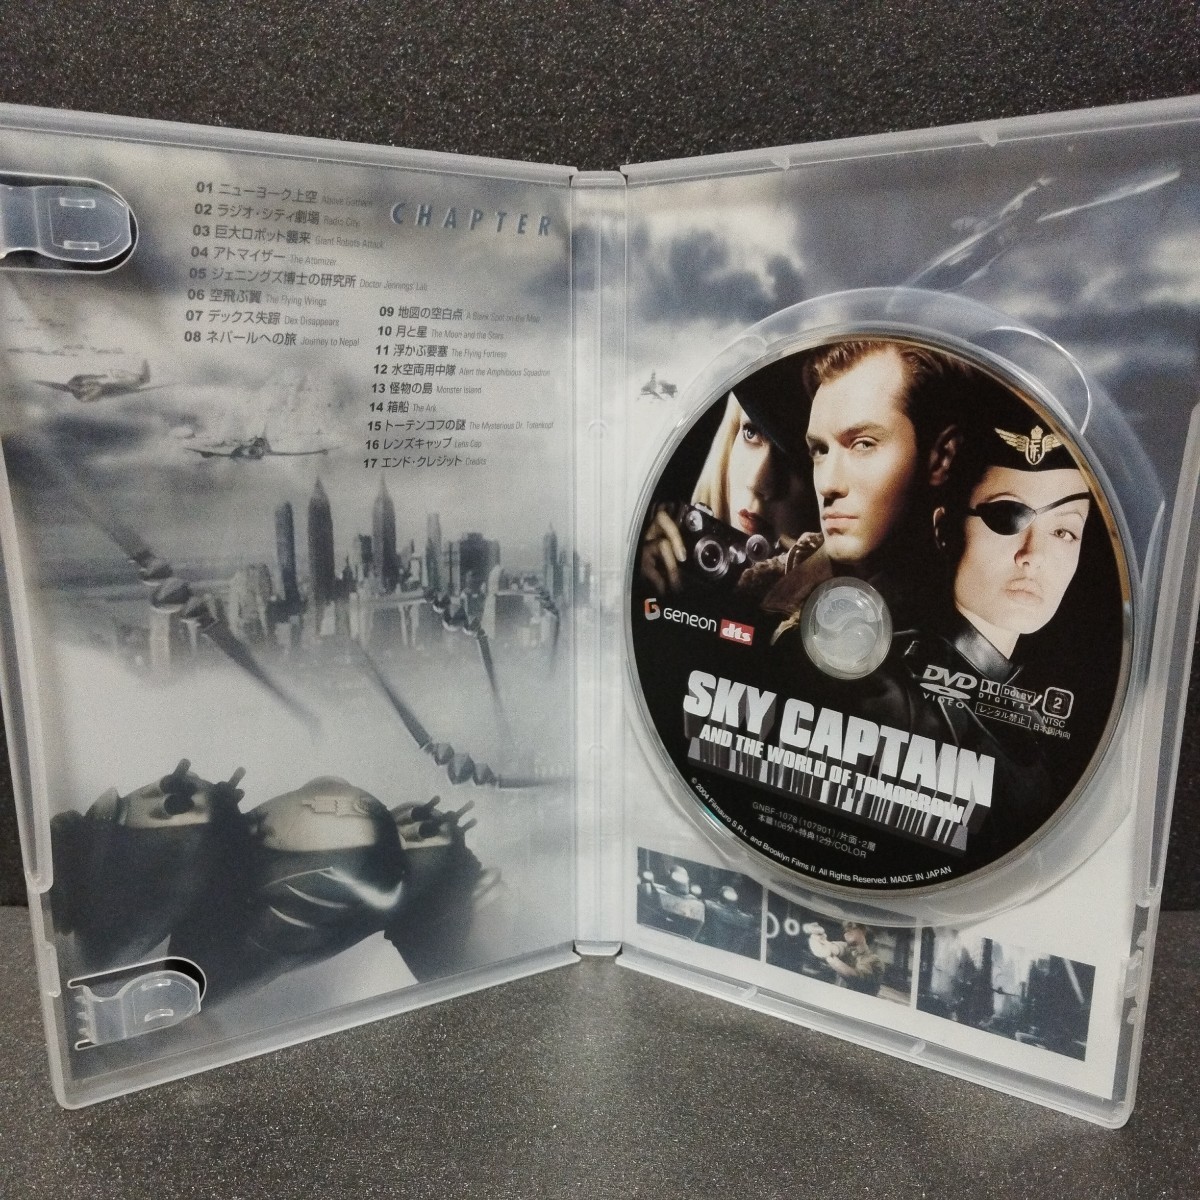 DVD SKY CAPTAIN Sky Captain \'04 rice the first times limitation special * price version ju-do* low gwines* Pal Toro u Kelly * navy blue Ran 